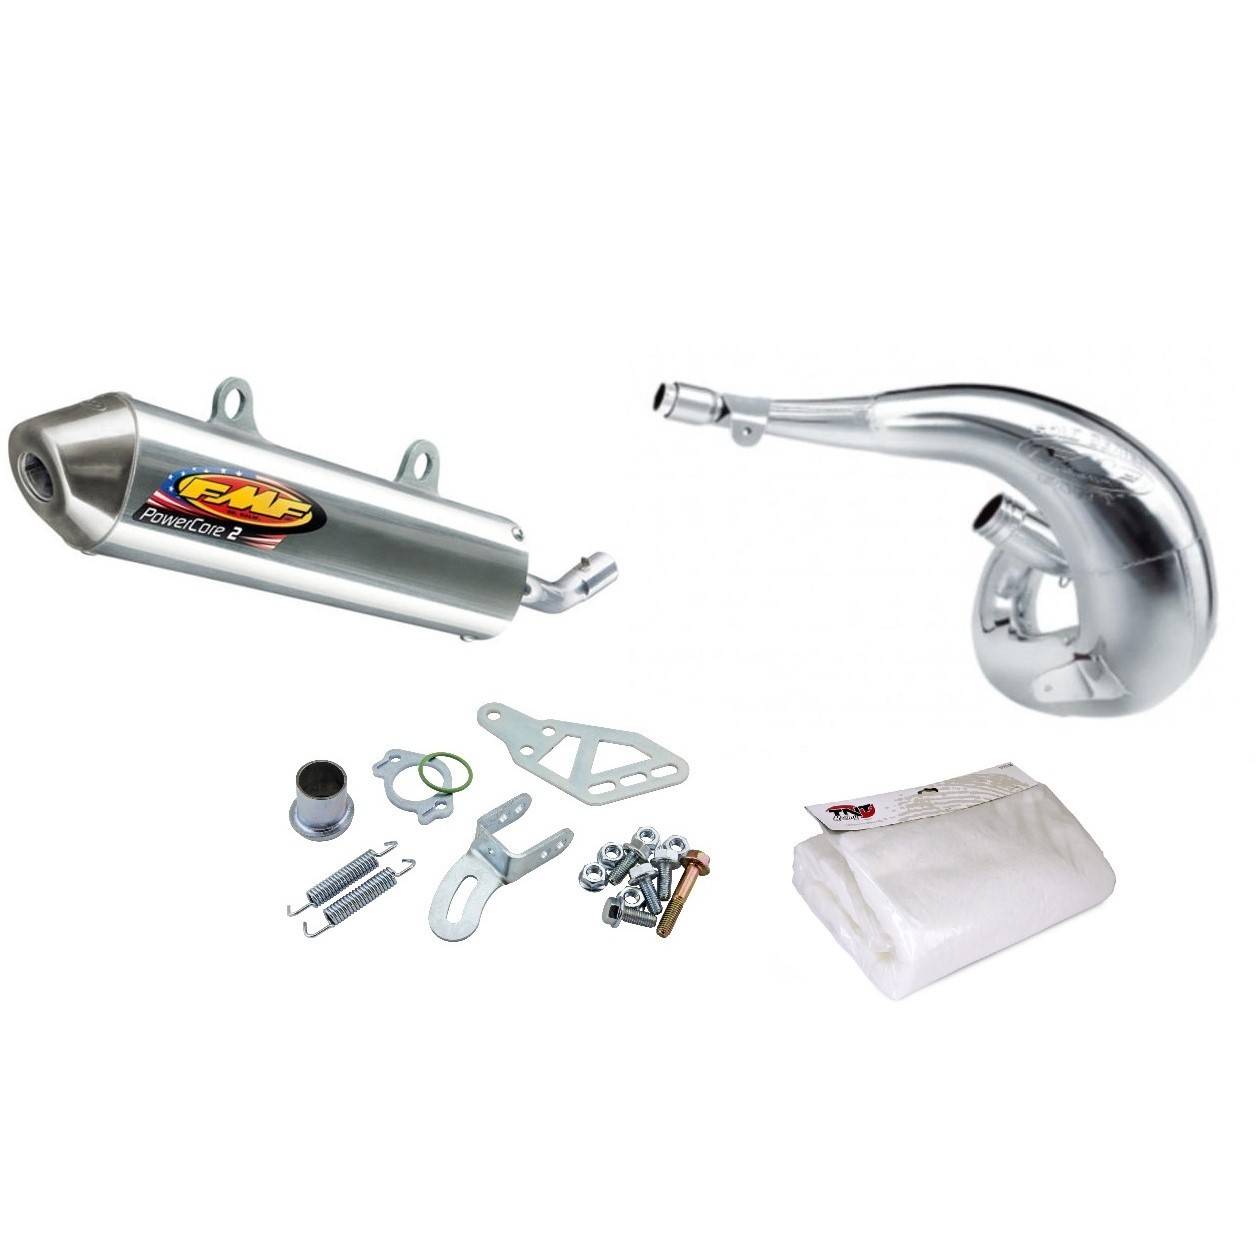 Exhaust and accessory HONDA 2 strokes